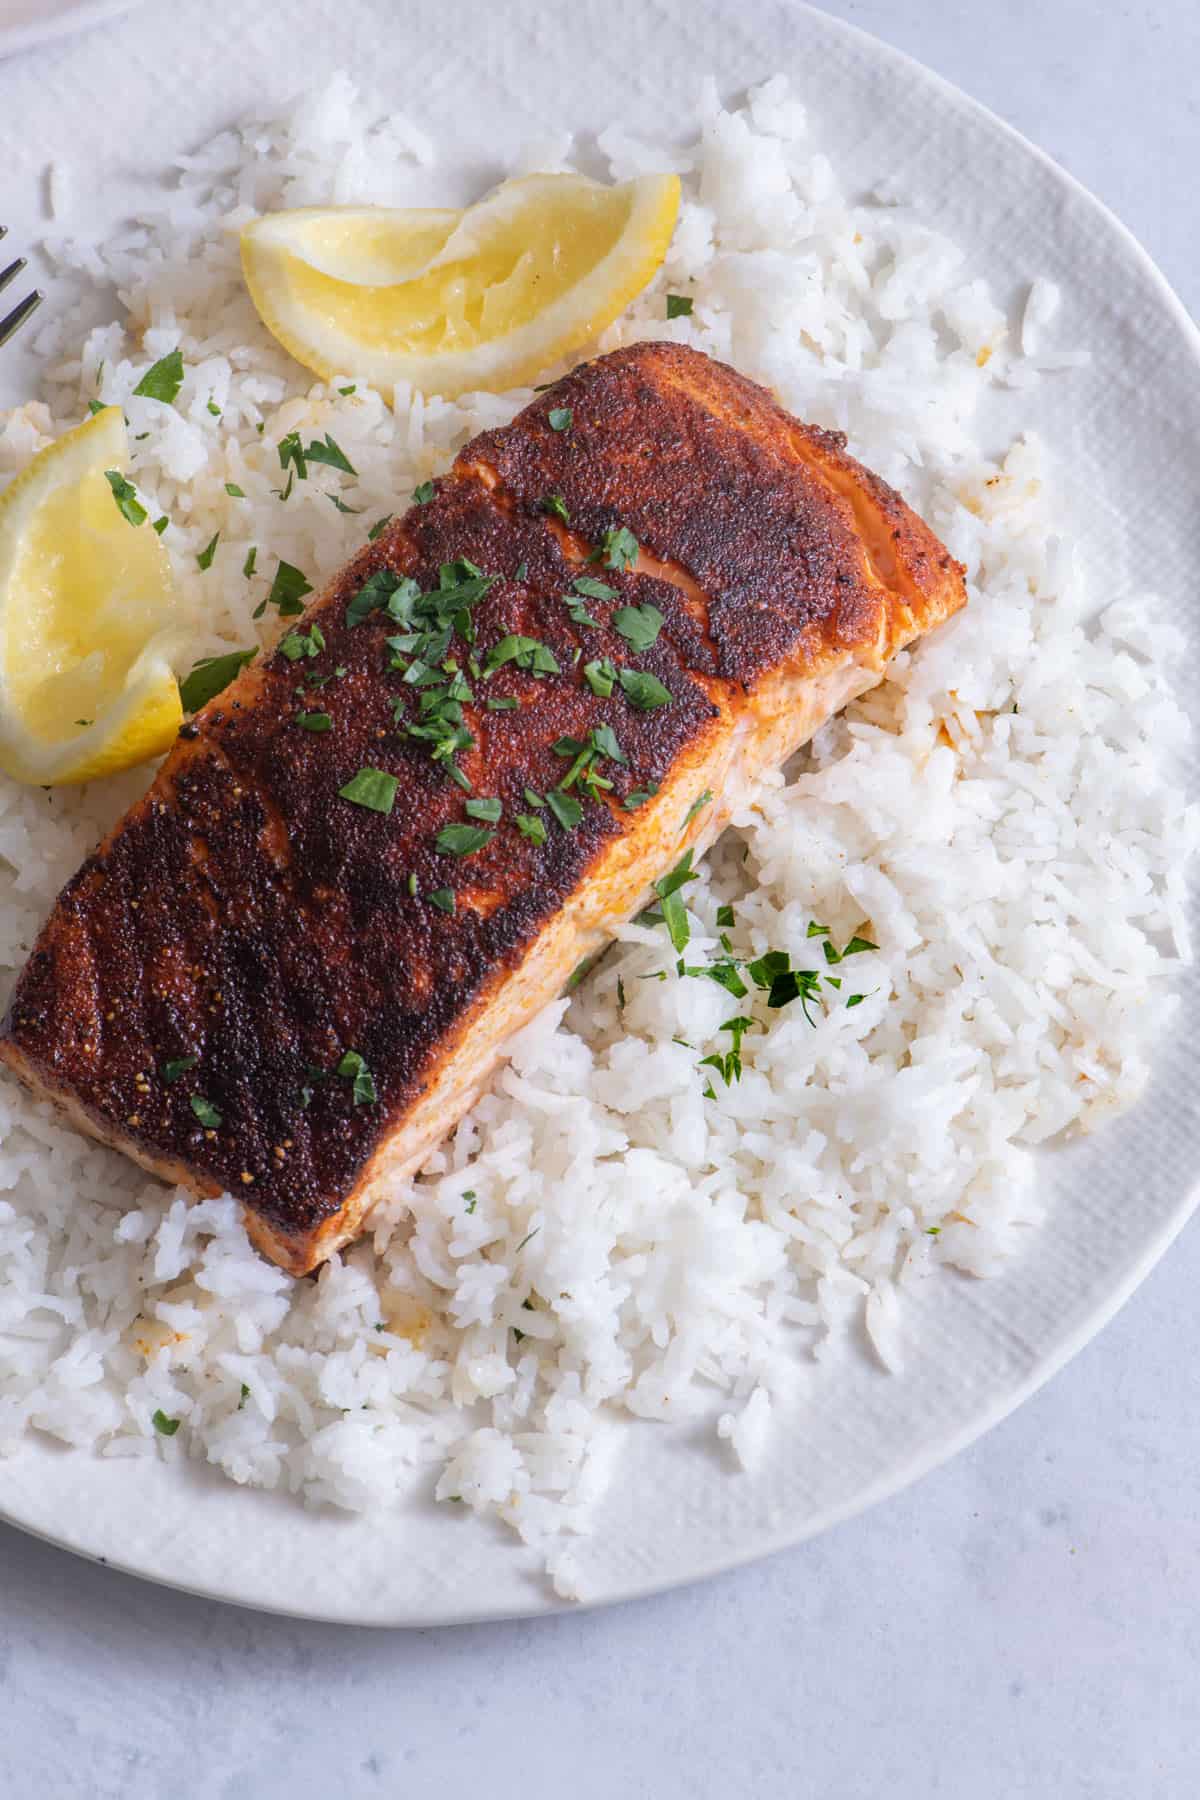 Large white serving plate full of basmati rice, topped with blackened salmon filet, and garnished with fresh parsley and two squeezed lemon slice.